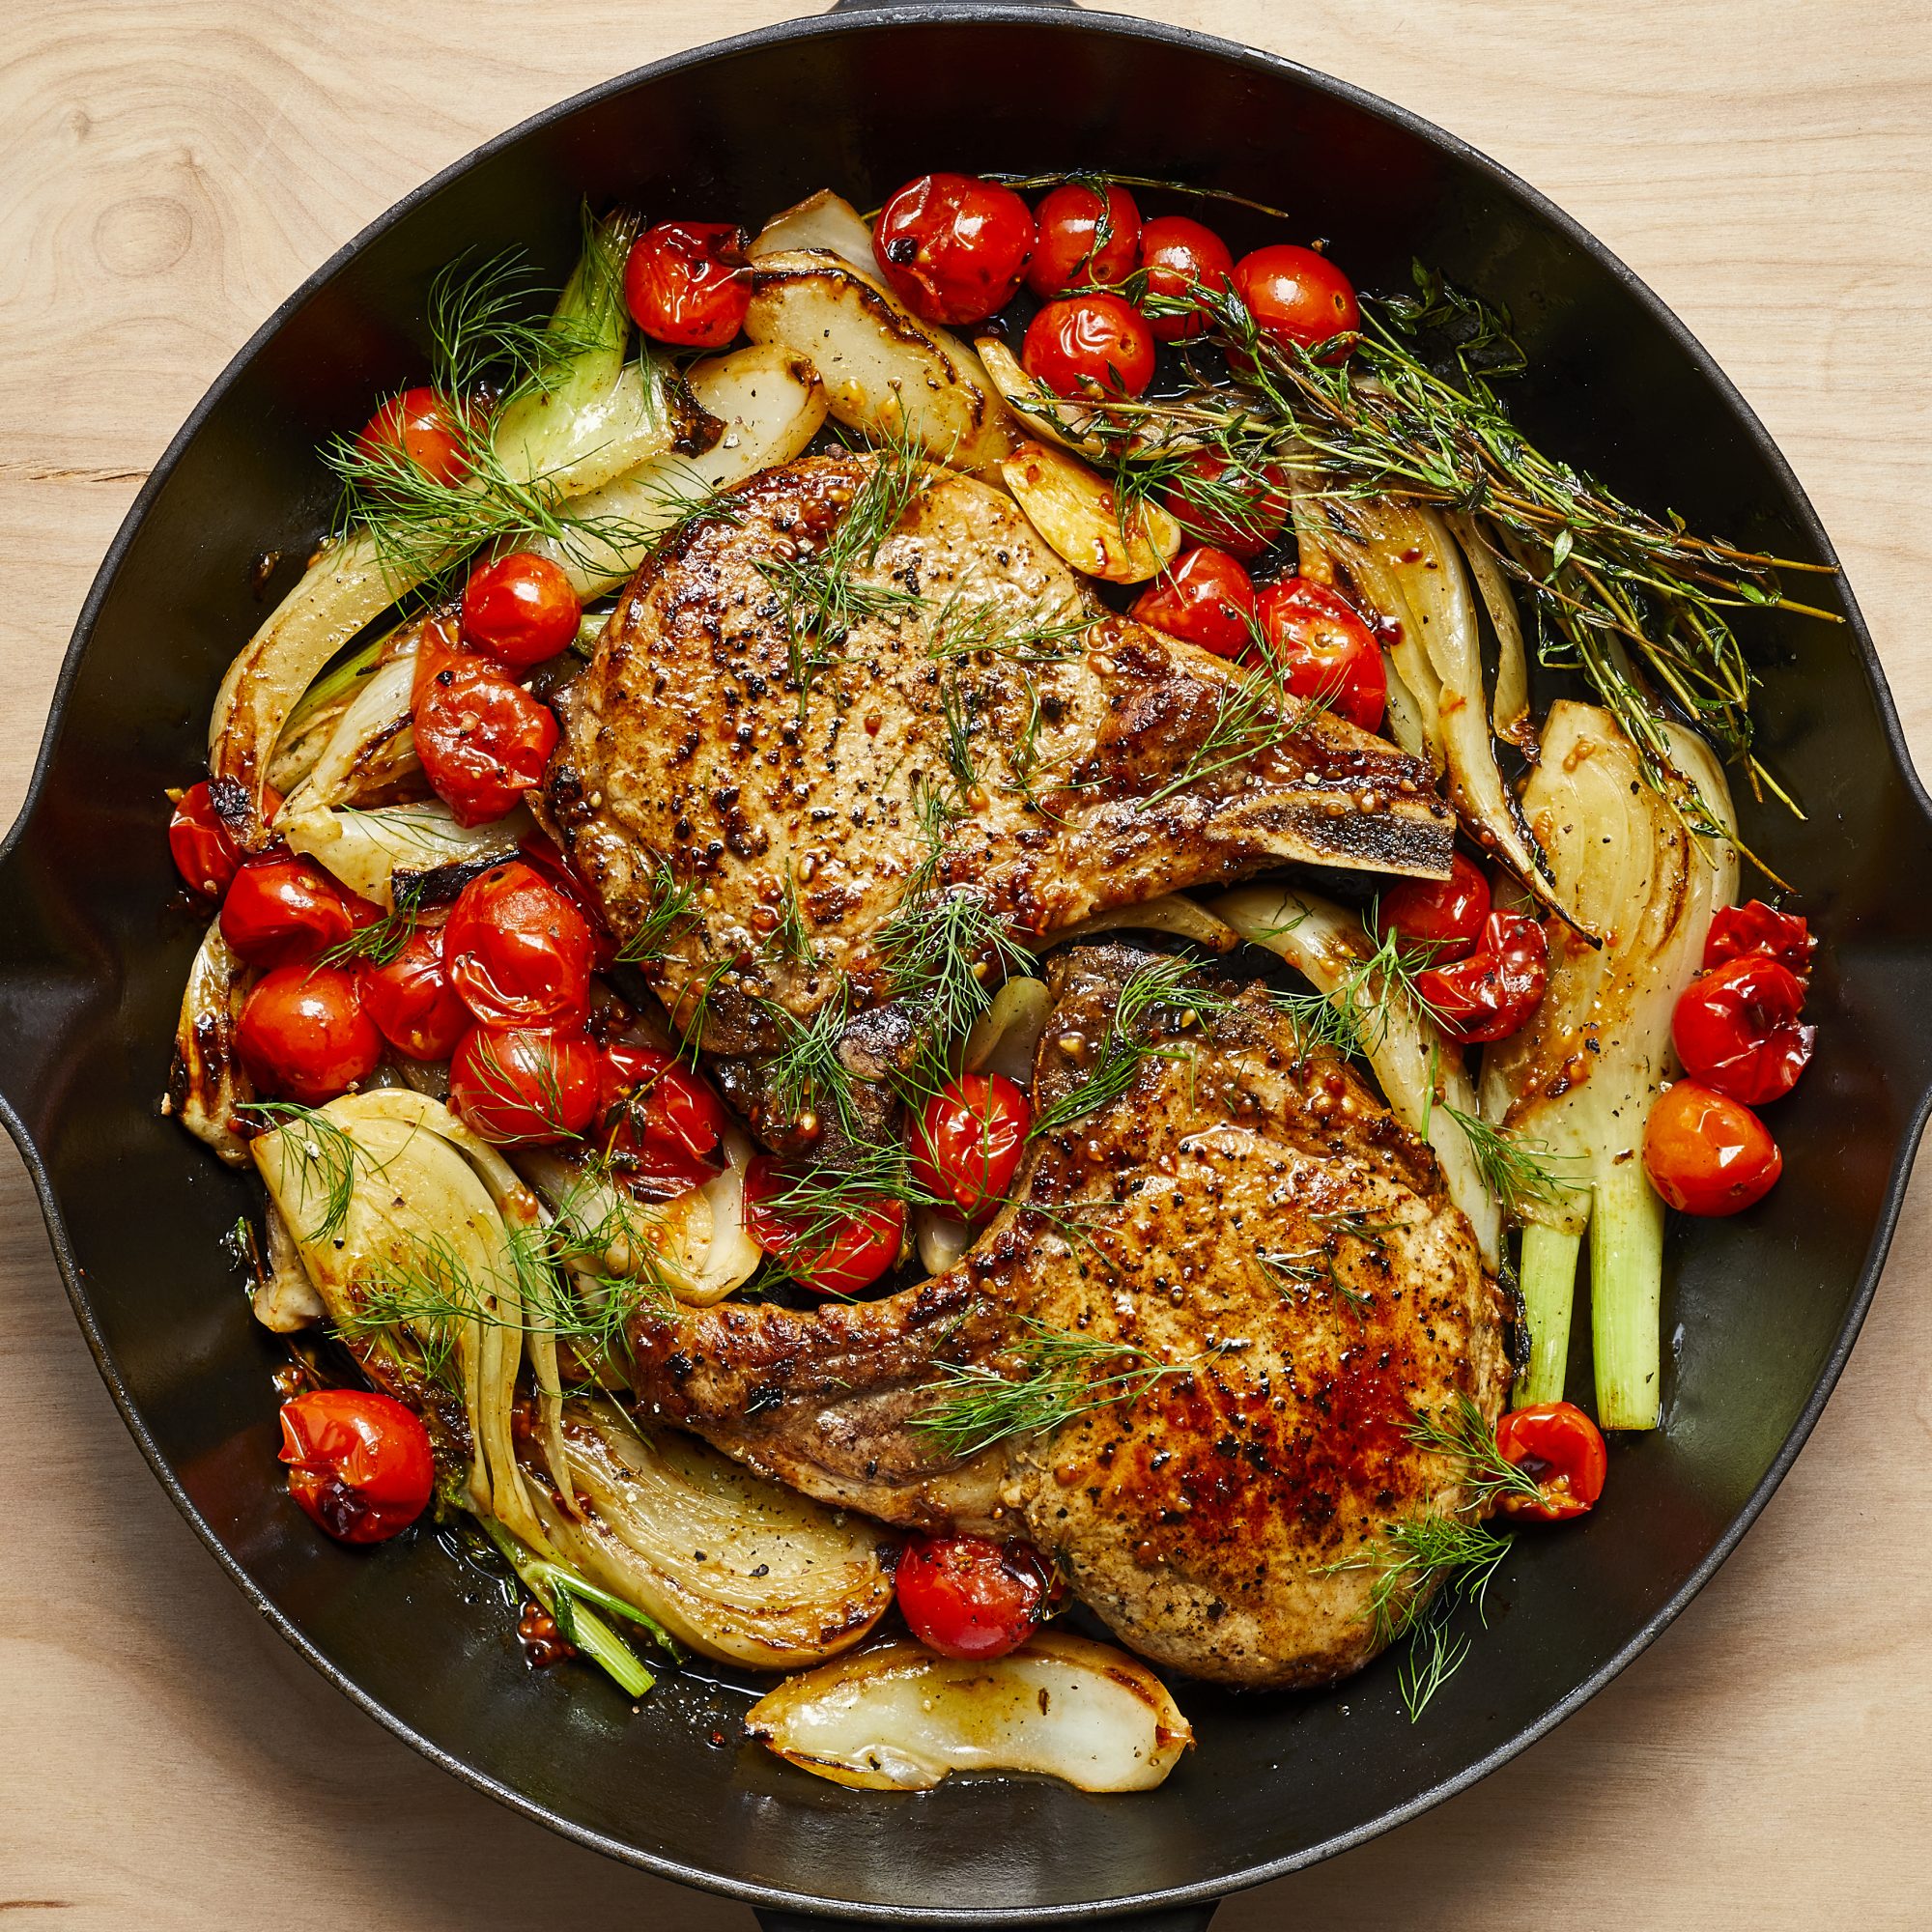 Pan-Seared Pork Chops with Roasted Fennel and Tomatoes